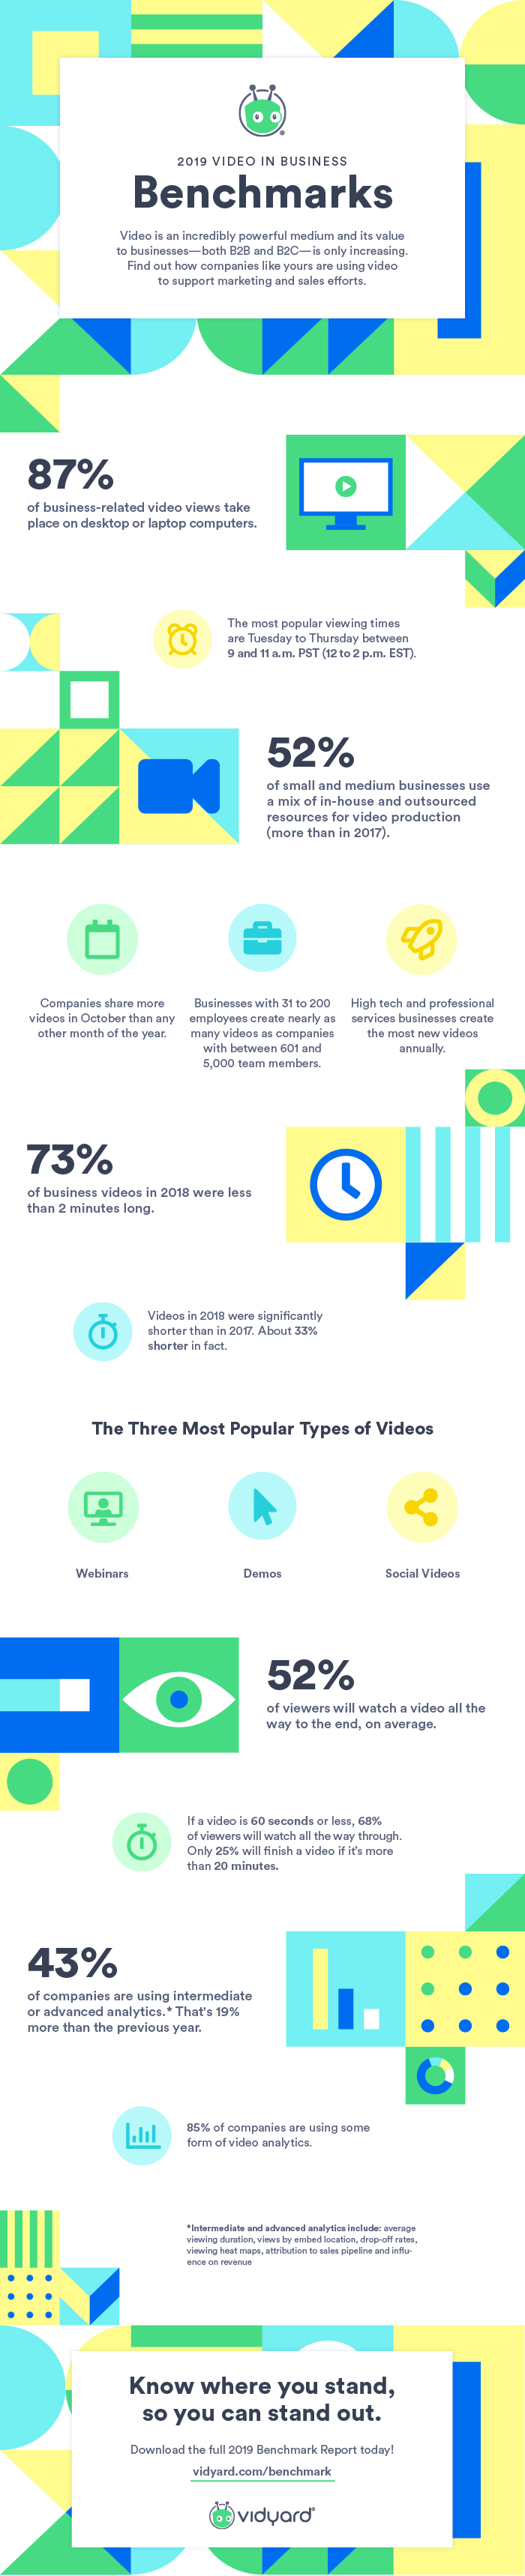 2019-video-in-business-benchmark-report-infographic